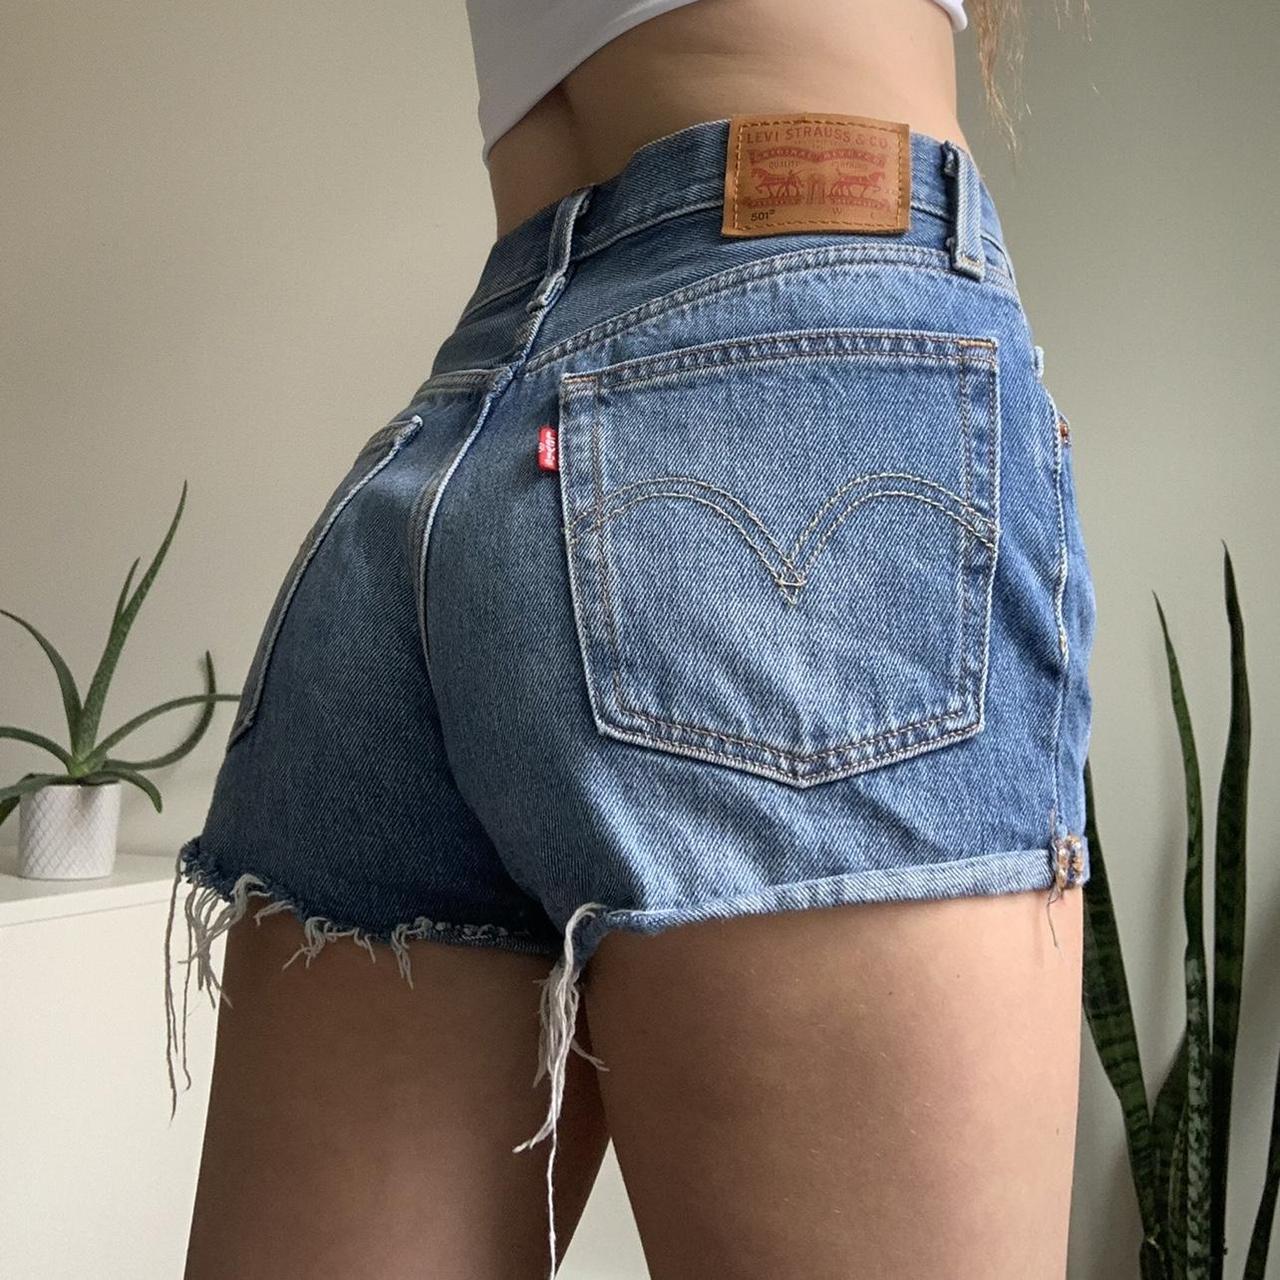 Levi's Women's Blue and White Shorts